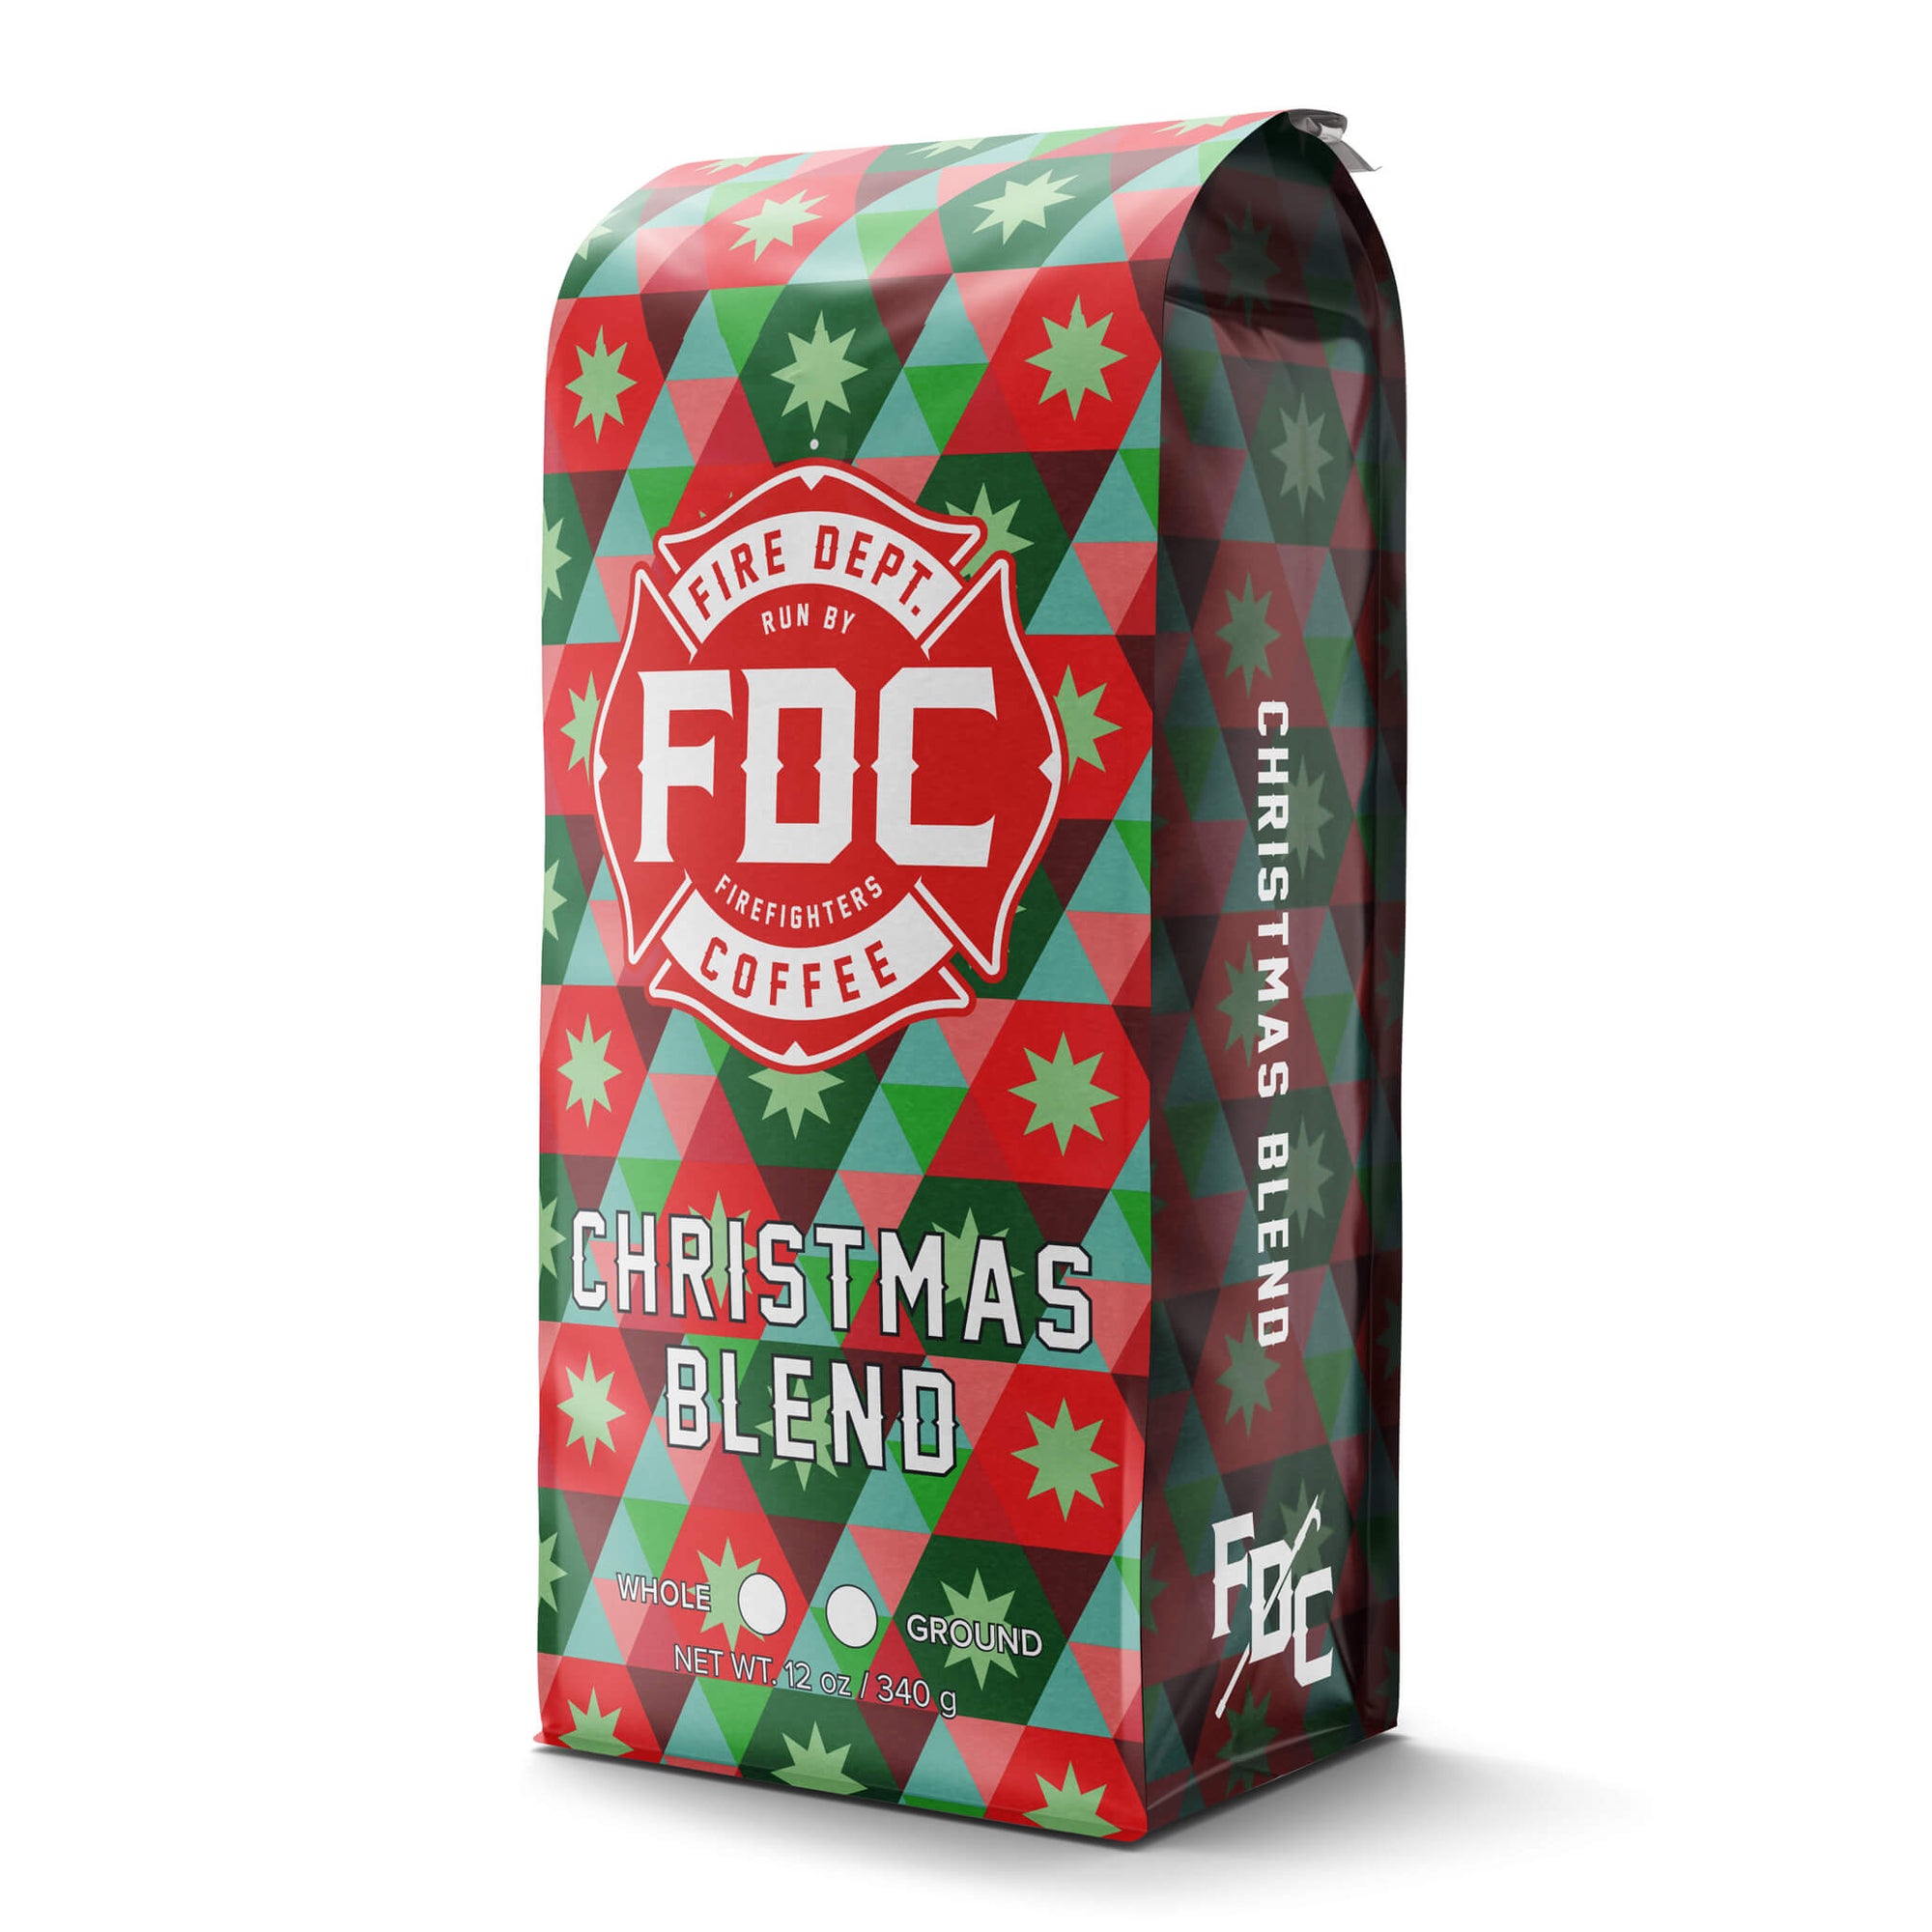 Fire Dept. Coffee's 12 ounce Christmas Blend Coffee in a rectangular package